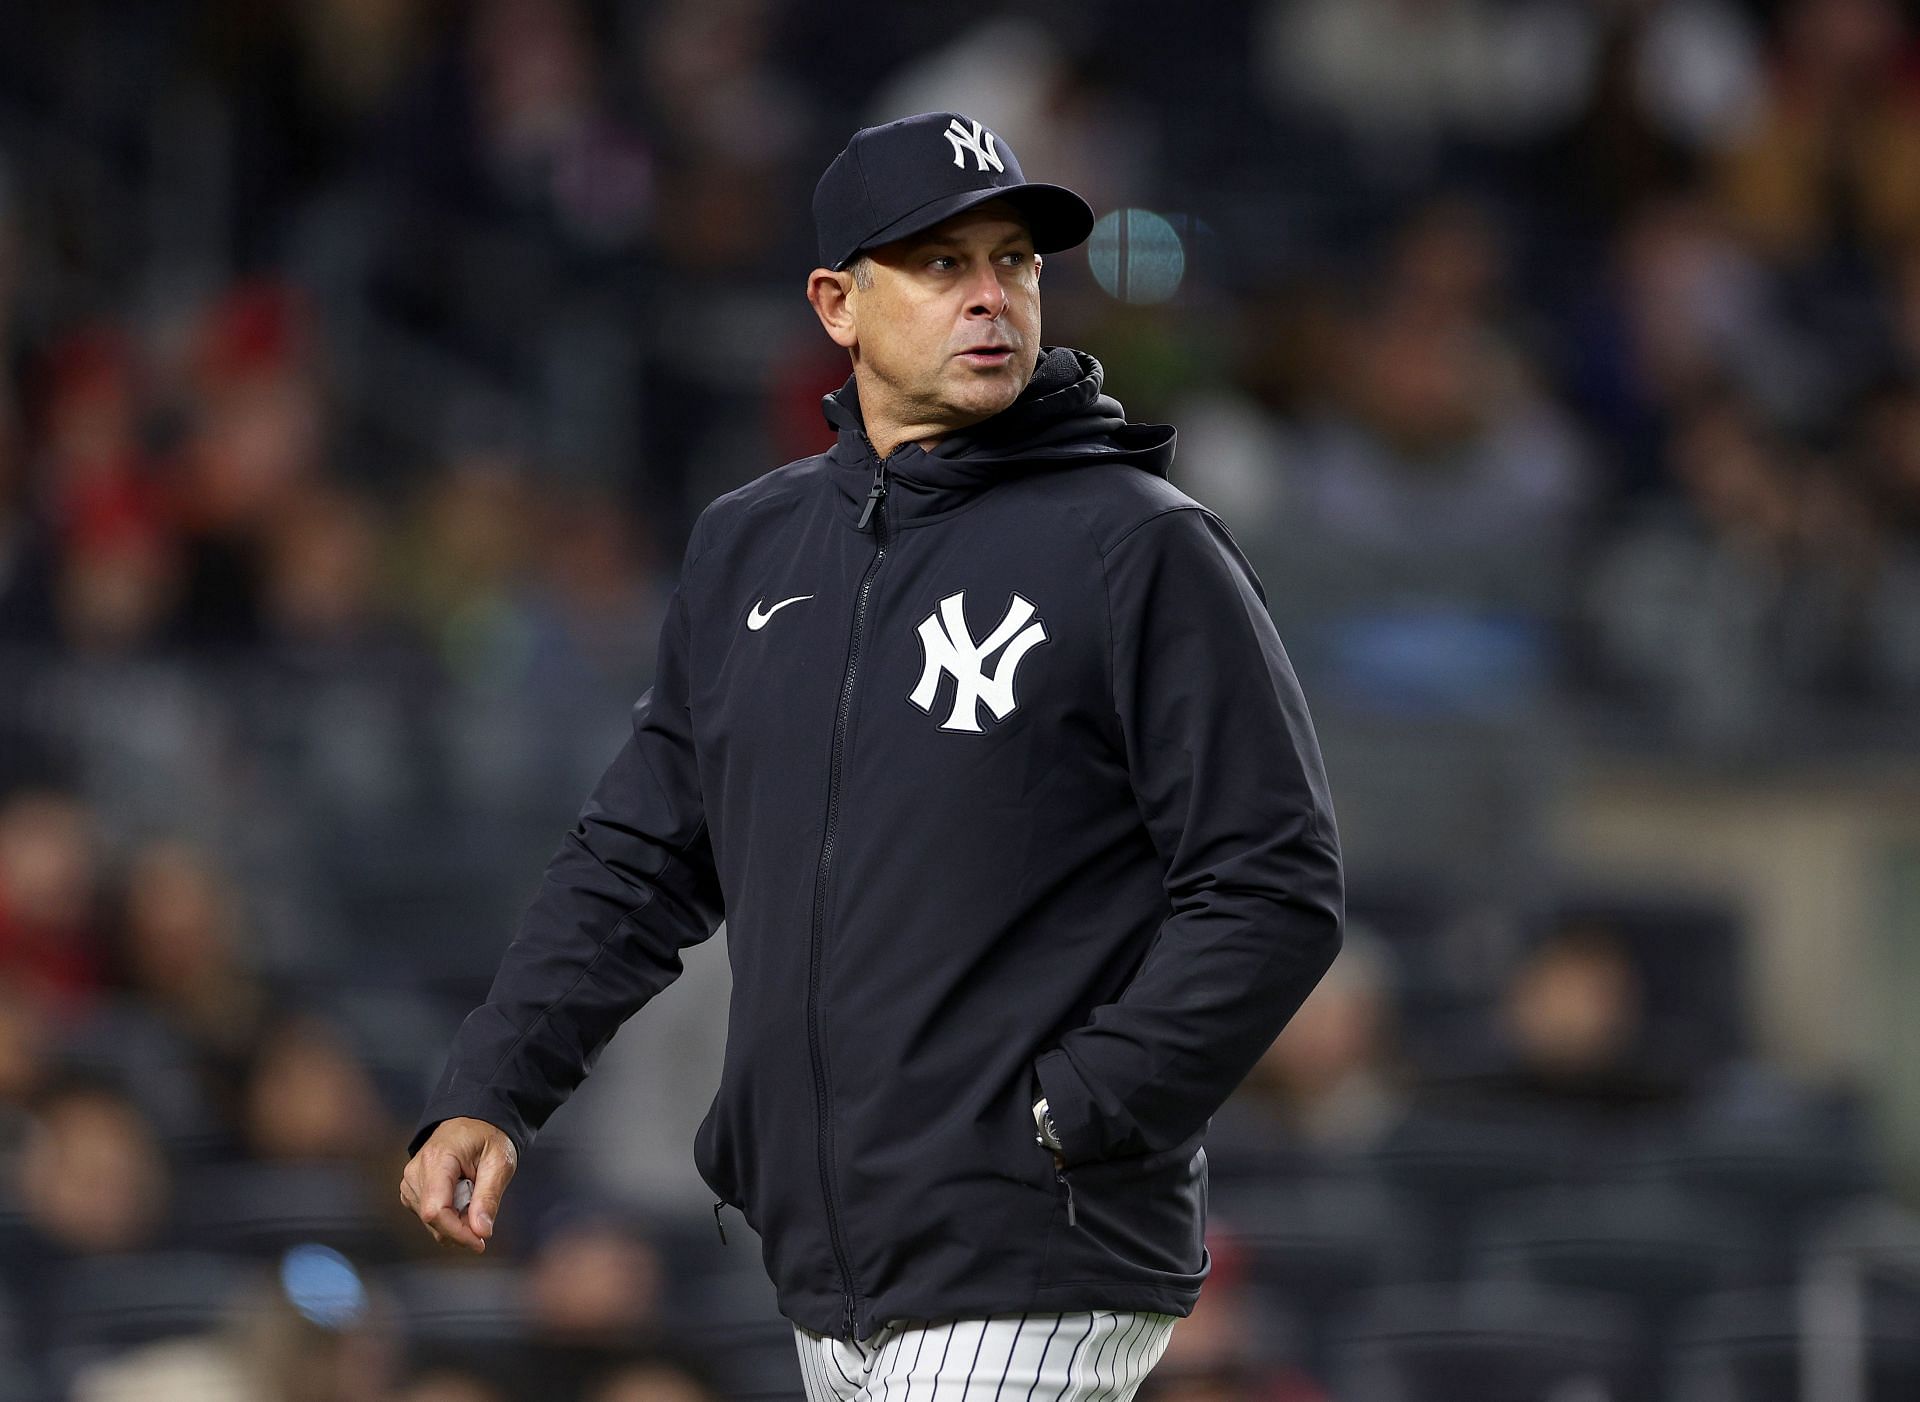 Aaron Boone's personality could be Yankees' greatest asset